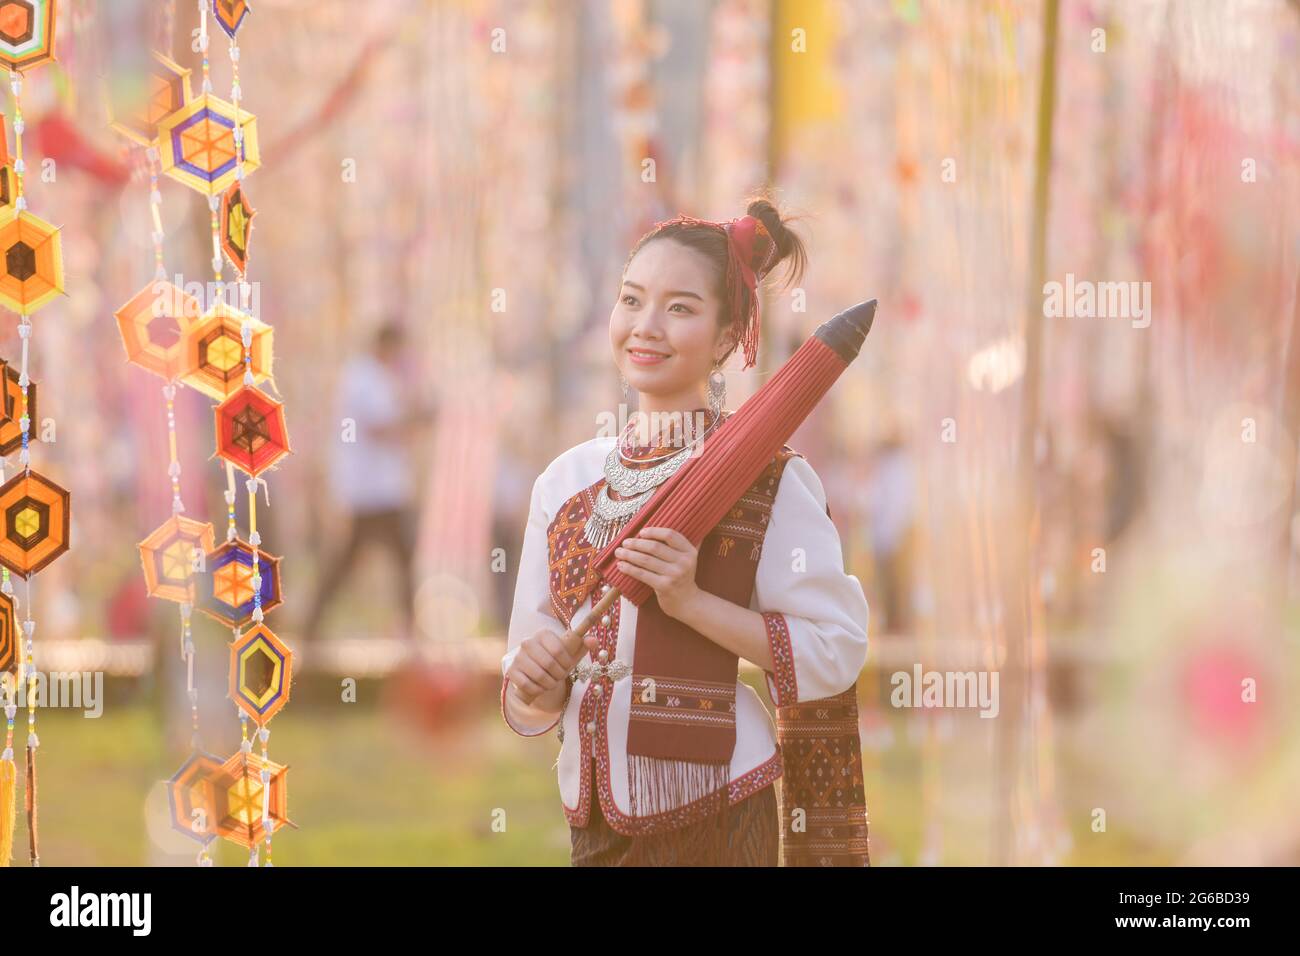 Portrait of a smiling woman in traditional Thai clothing holding a parasol, Thailand Stock Photo